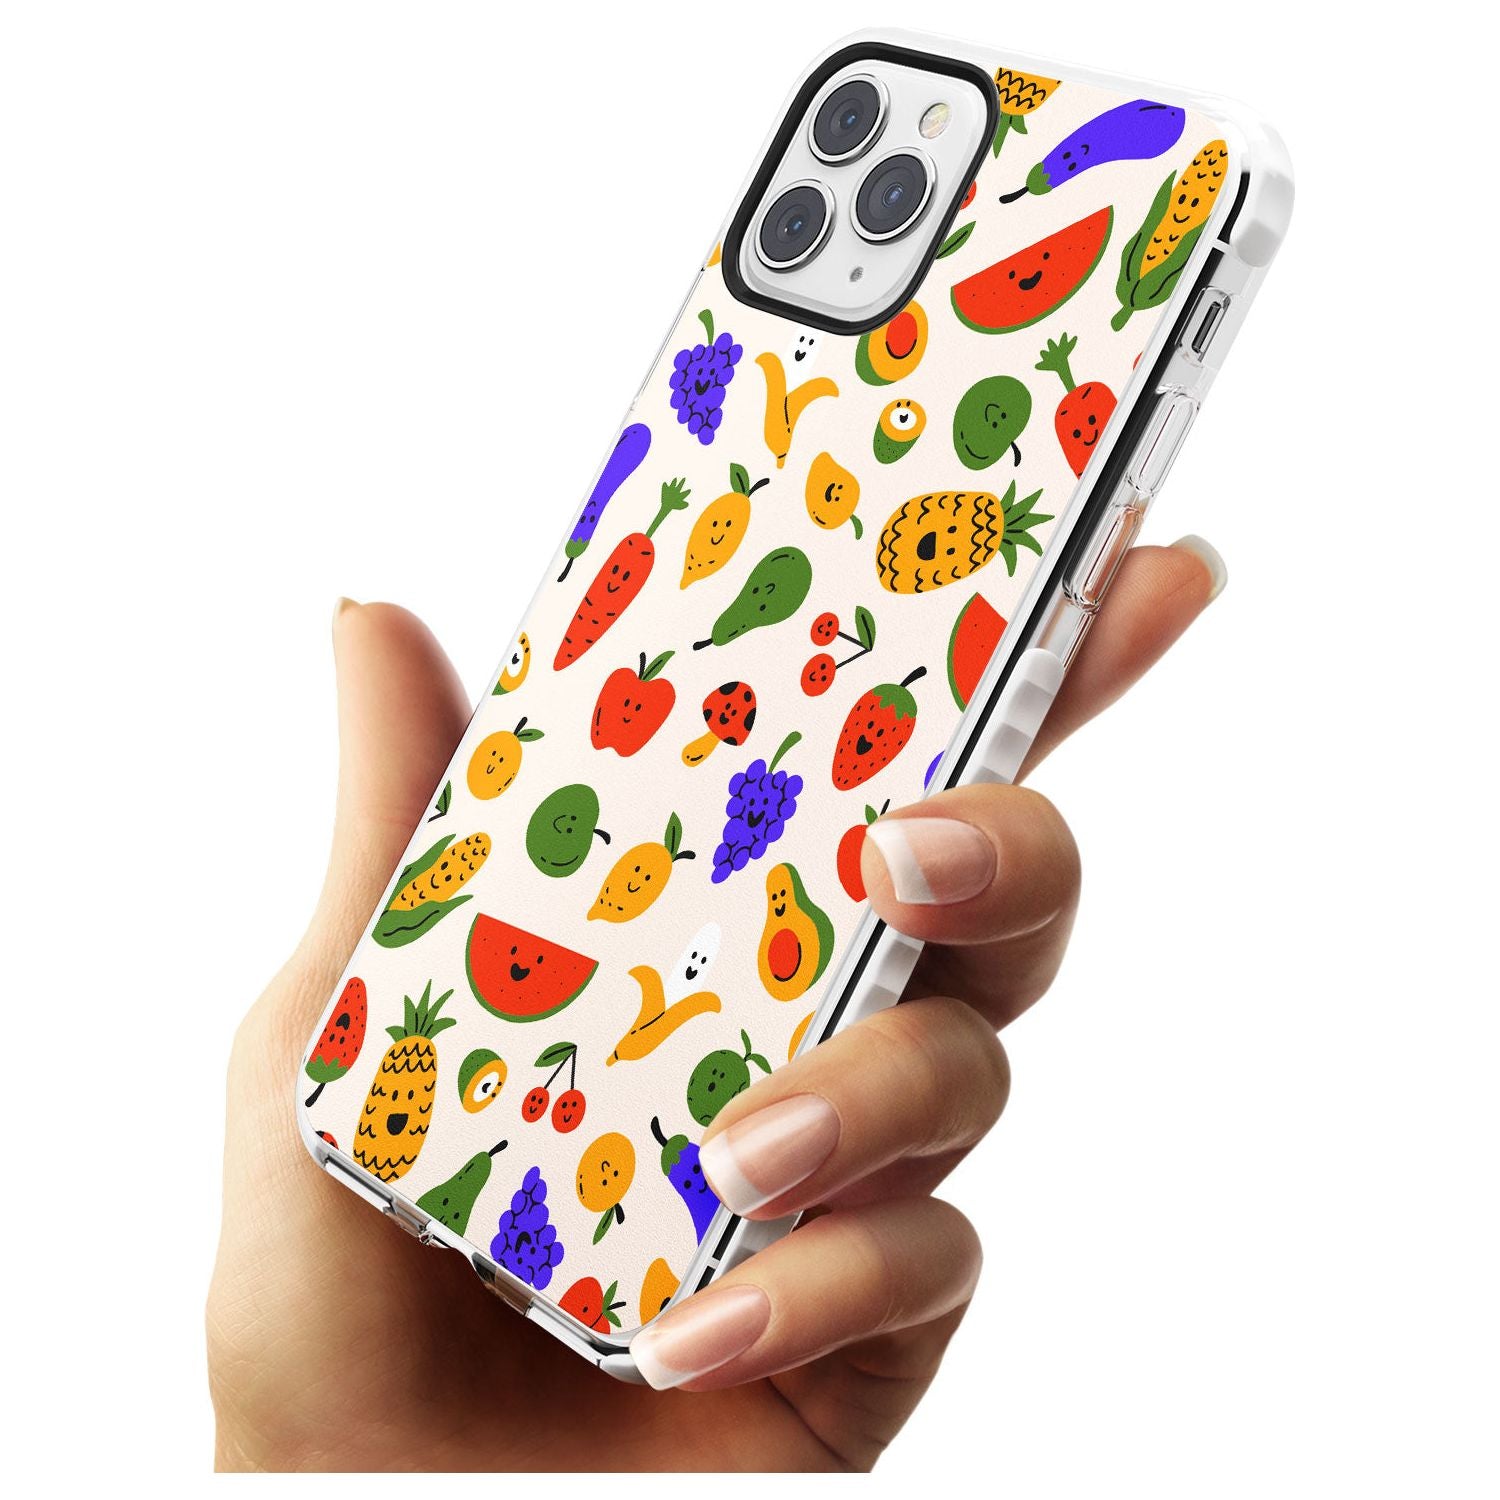 Mixed Kawaii Food Icons - Solid iPhone Case Impact Phone Case Warehouse 11 Pro Max